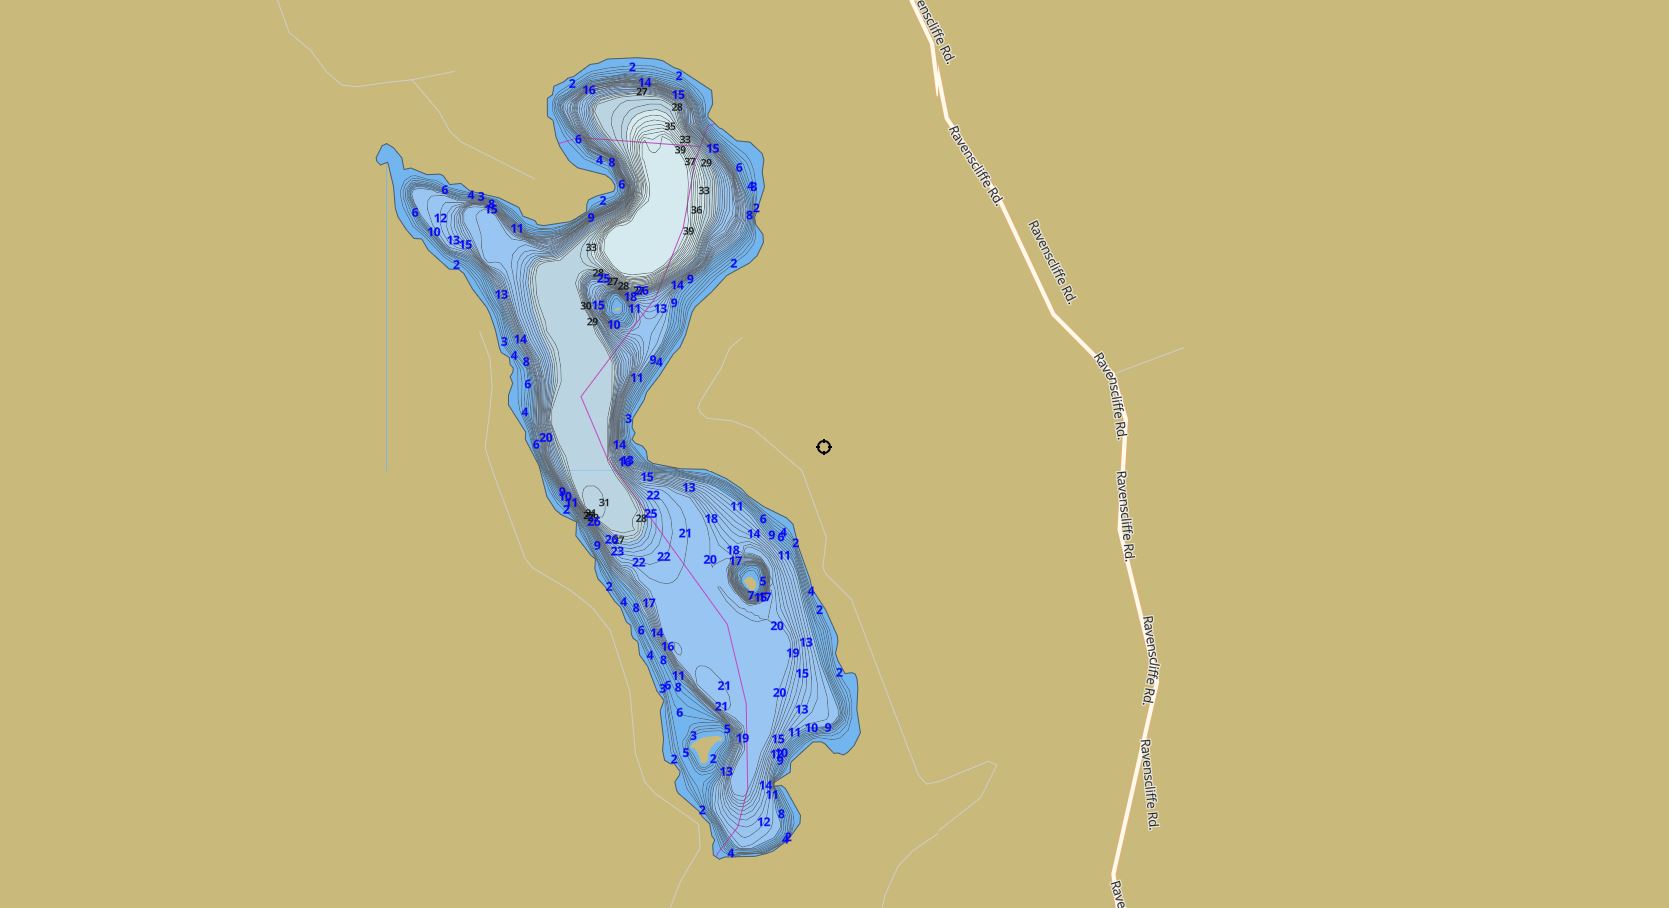 Contour Map of Fox Lake in Municipality of Huntsville and the District of Muskoka